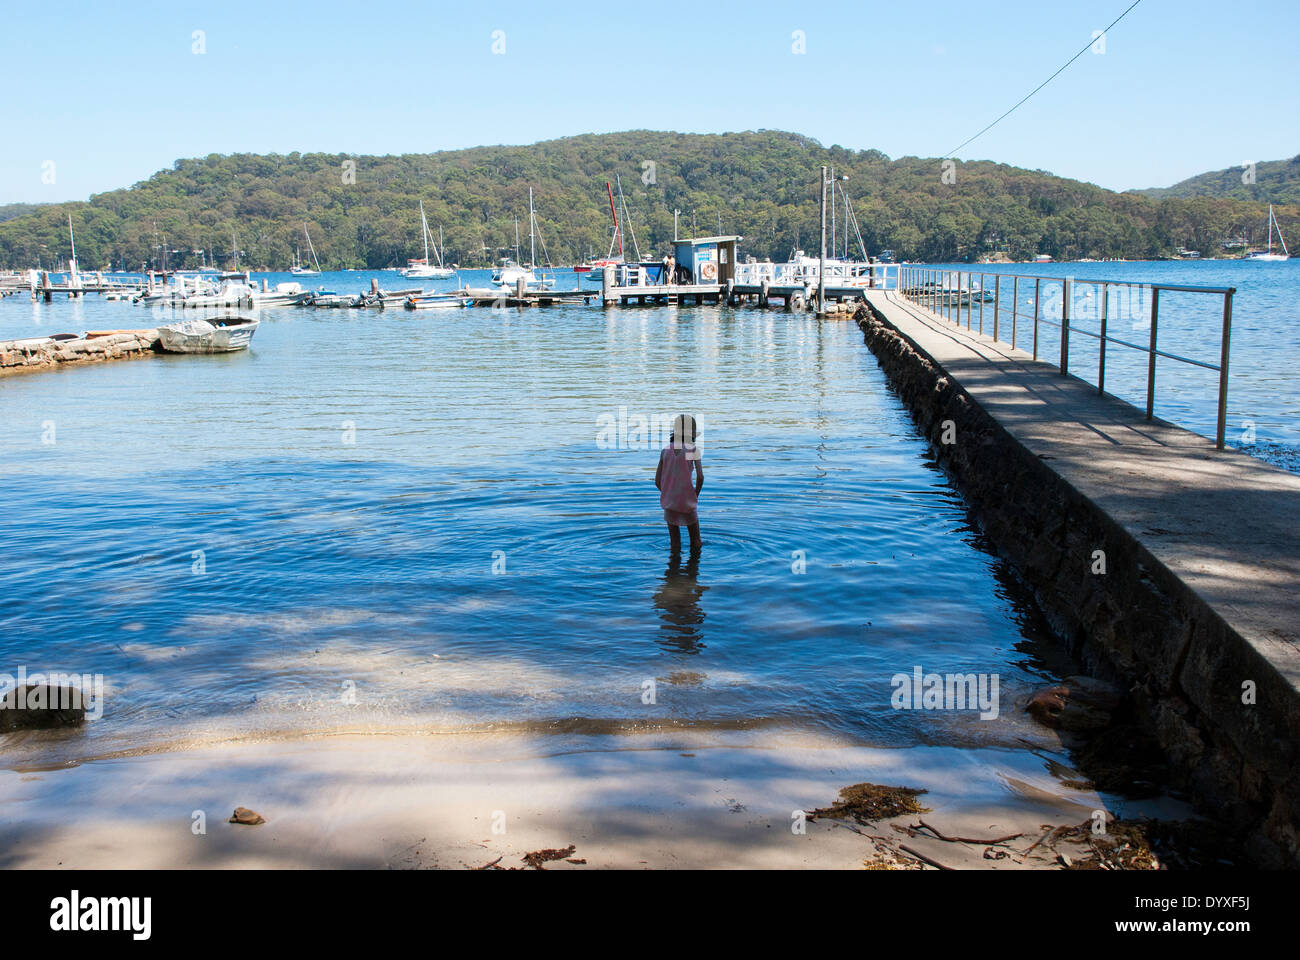 A young girl wading in the water at Scotland Island, Pittwater, Sydney, Australia Stock Photo